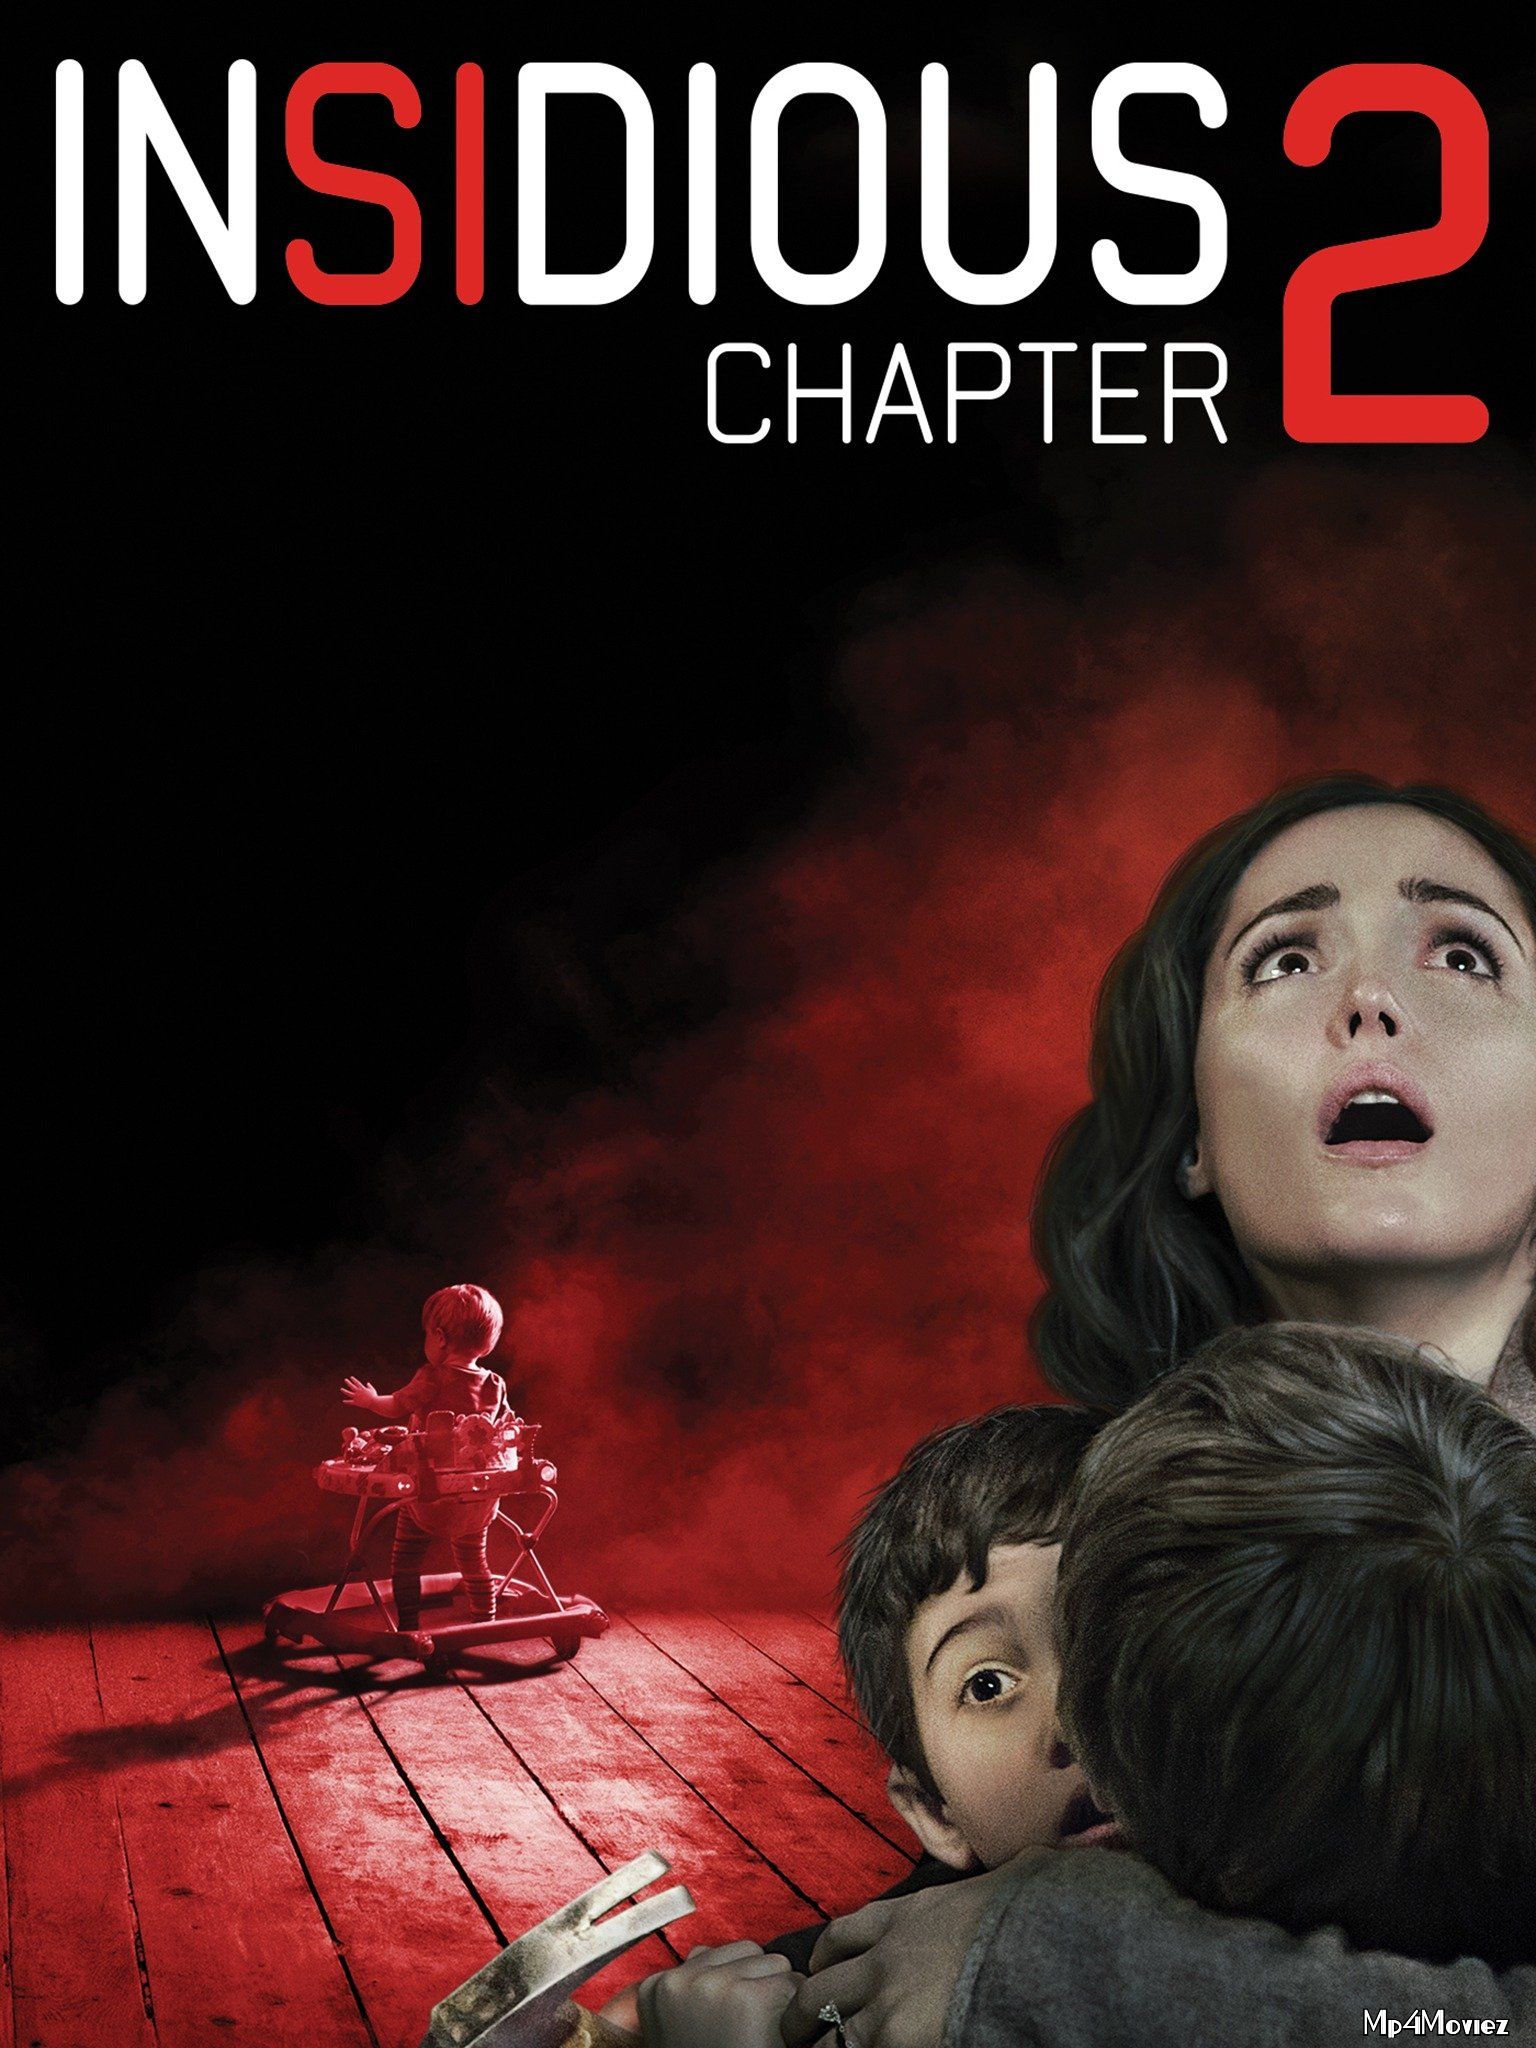 Insidious Chapter 2 (2013) Hindi Dubbed BluRay download full movie